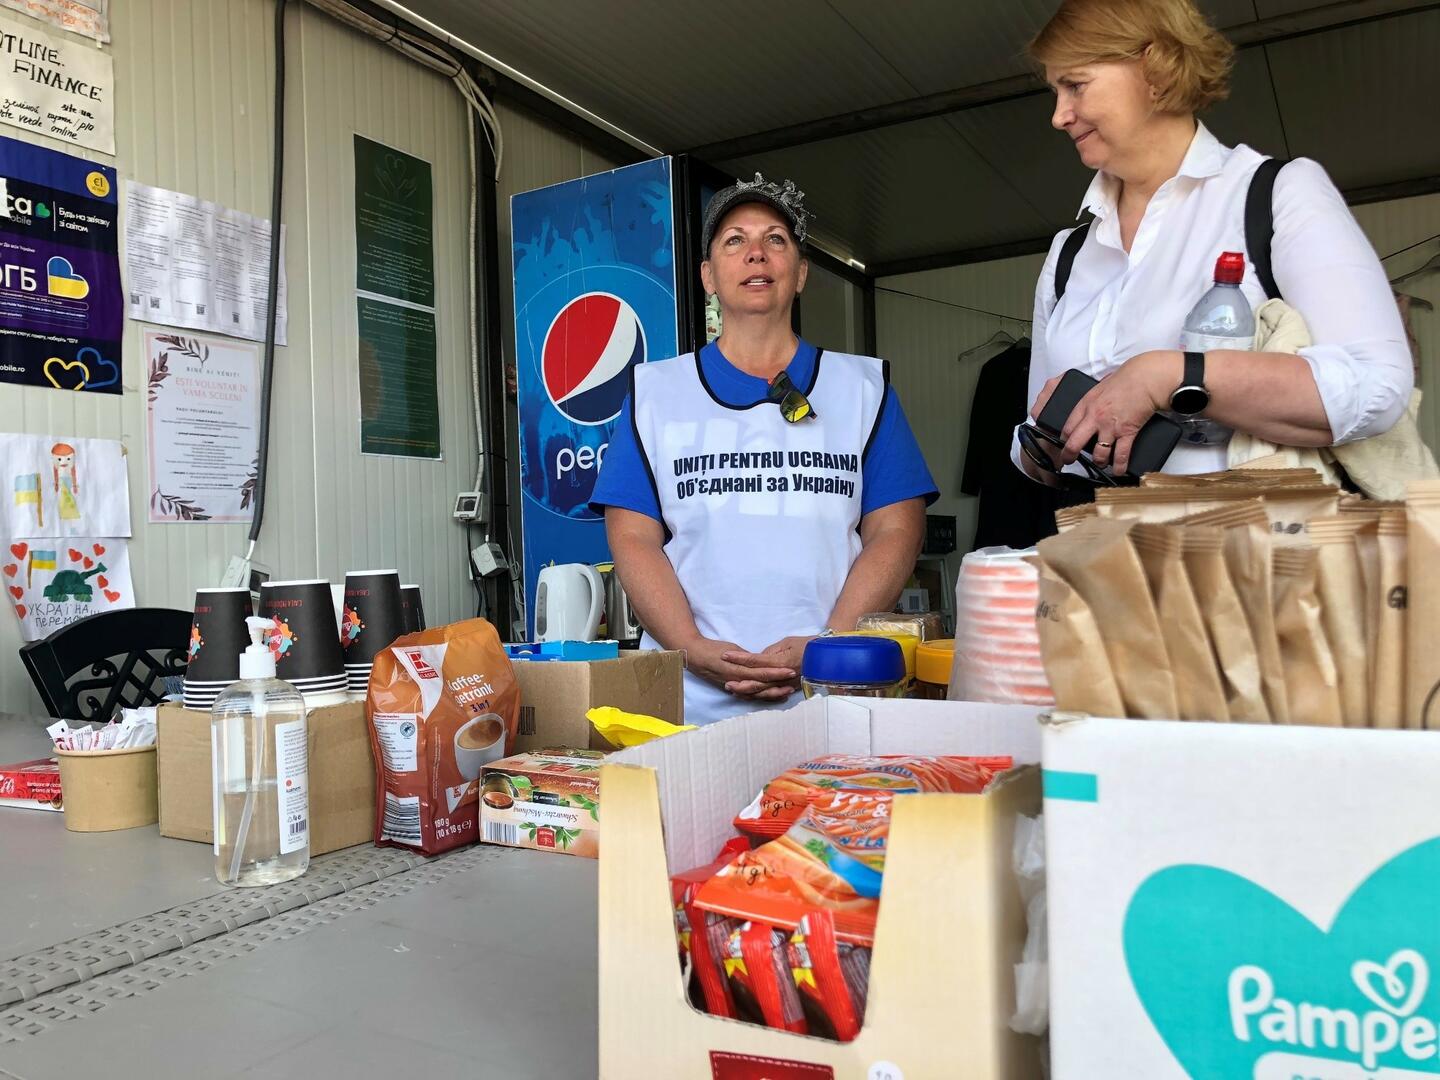 Volunteer at the Romanian side provides coffee, pampers, wet wipes and all necessities © Eva Marie Bulai